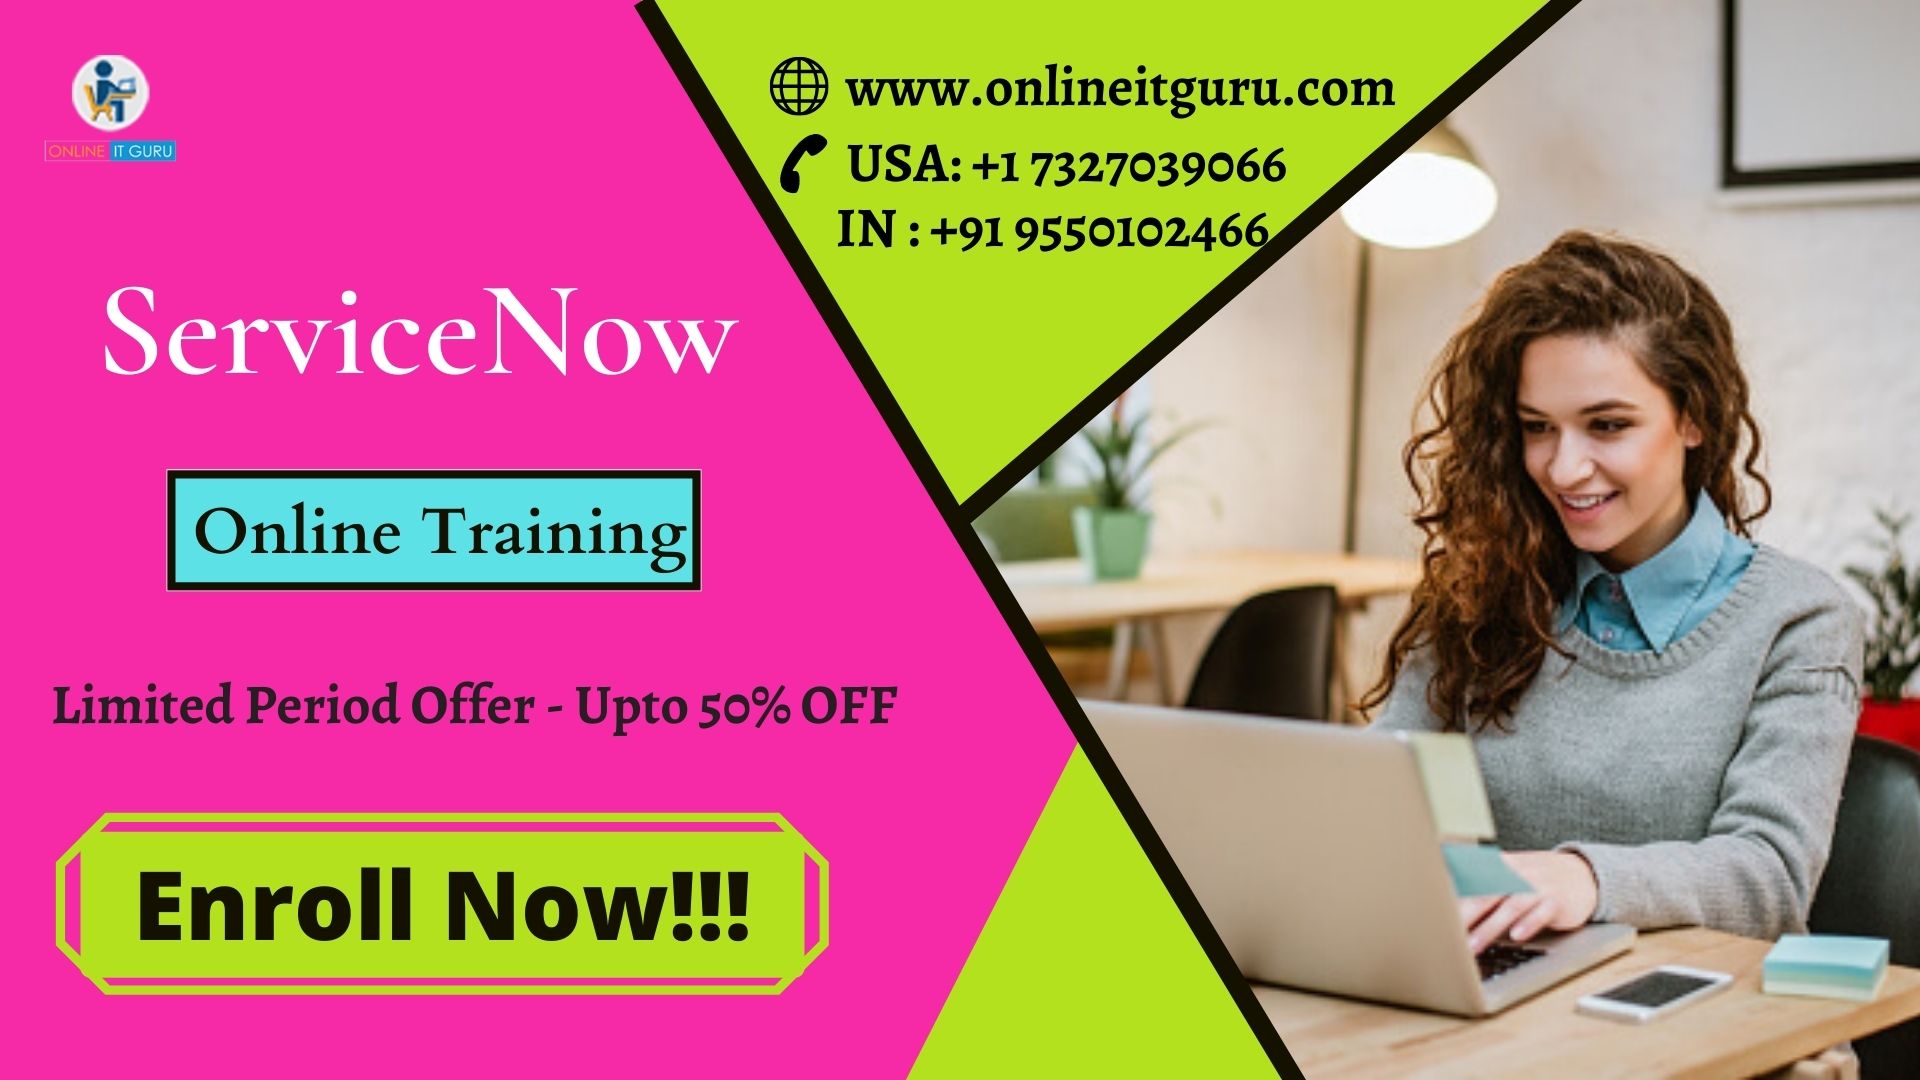 ServiceNow Online Training | ServiceNow Training in Ameerpet, Online Event